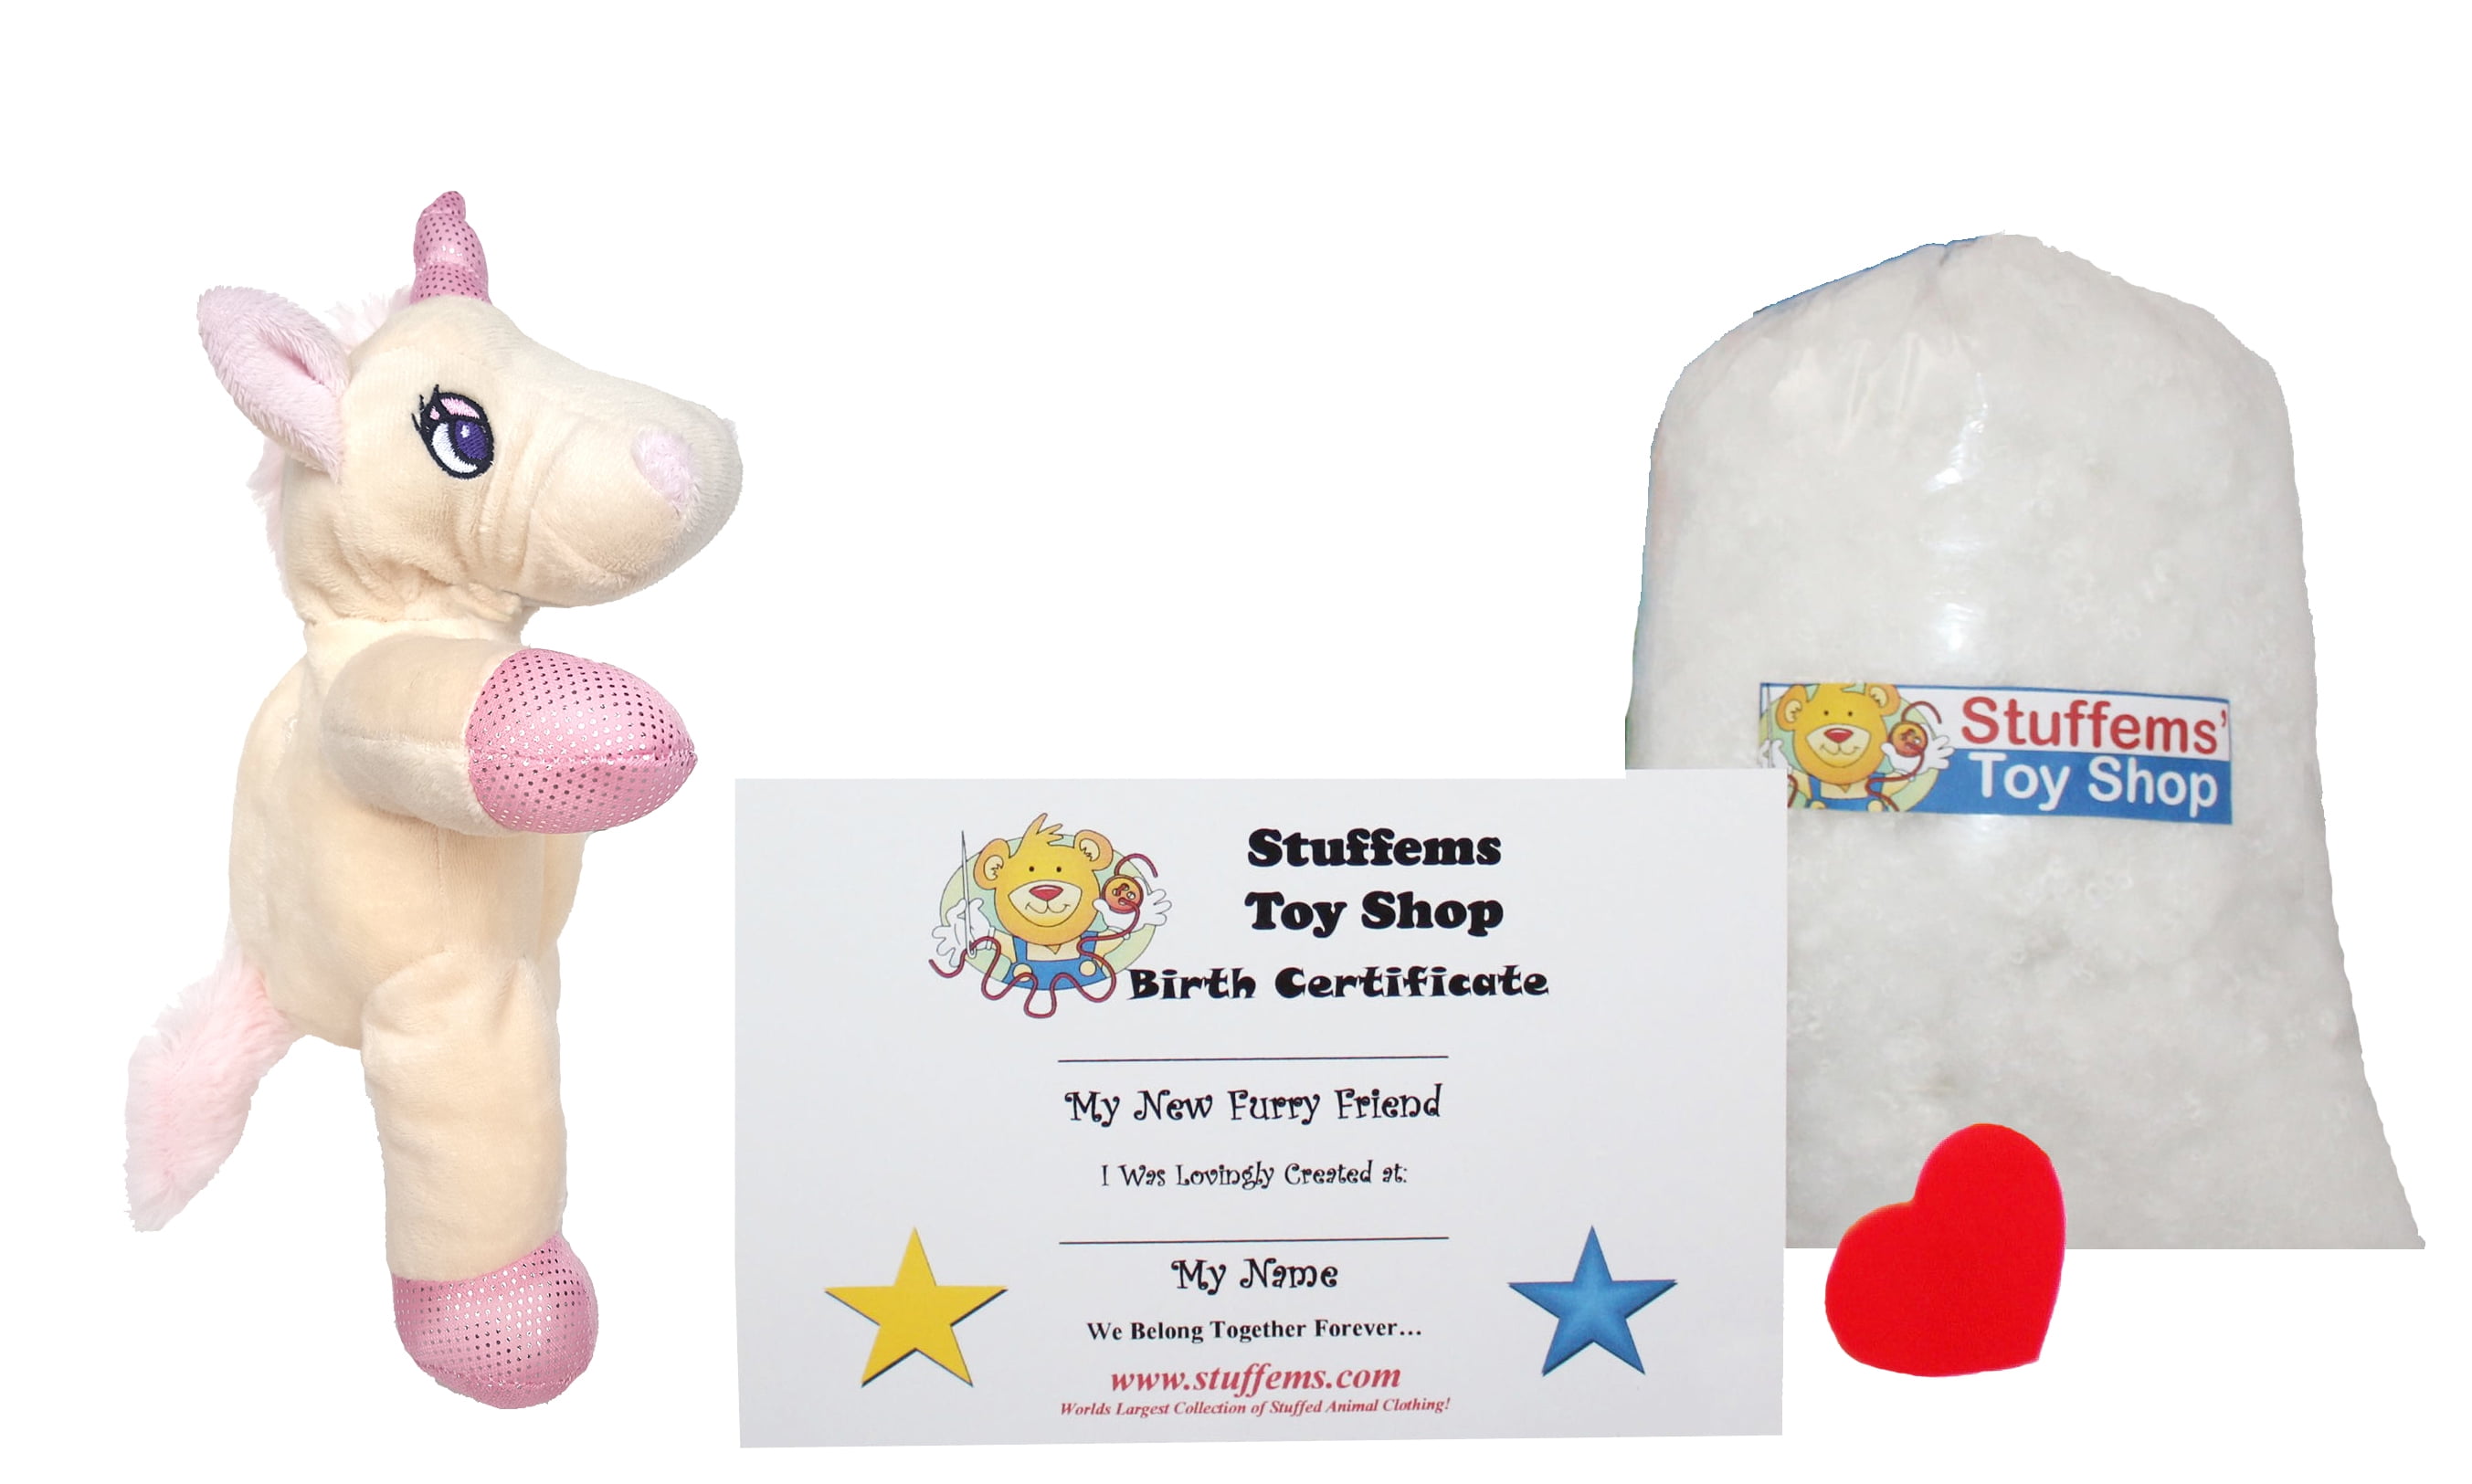 Make Your Own Stuffed Animal Mini 8 Inch Unicorn with Embroidered Eyes Kit  - No Sewing Required! 